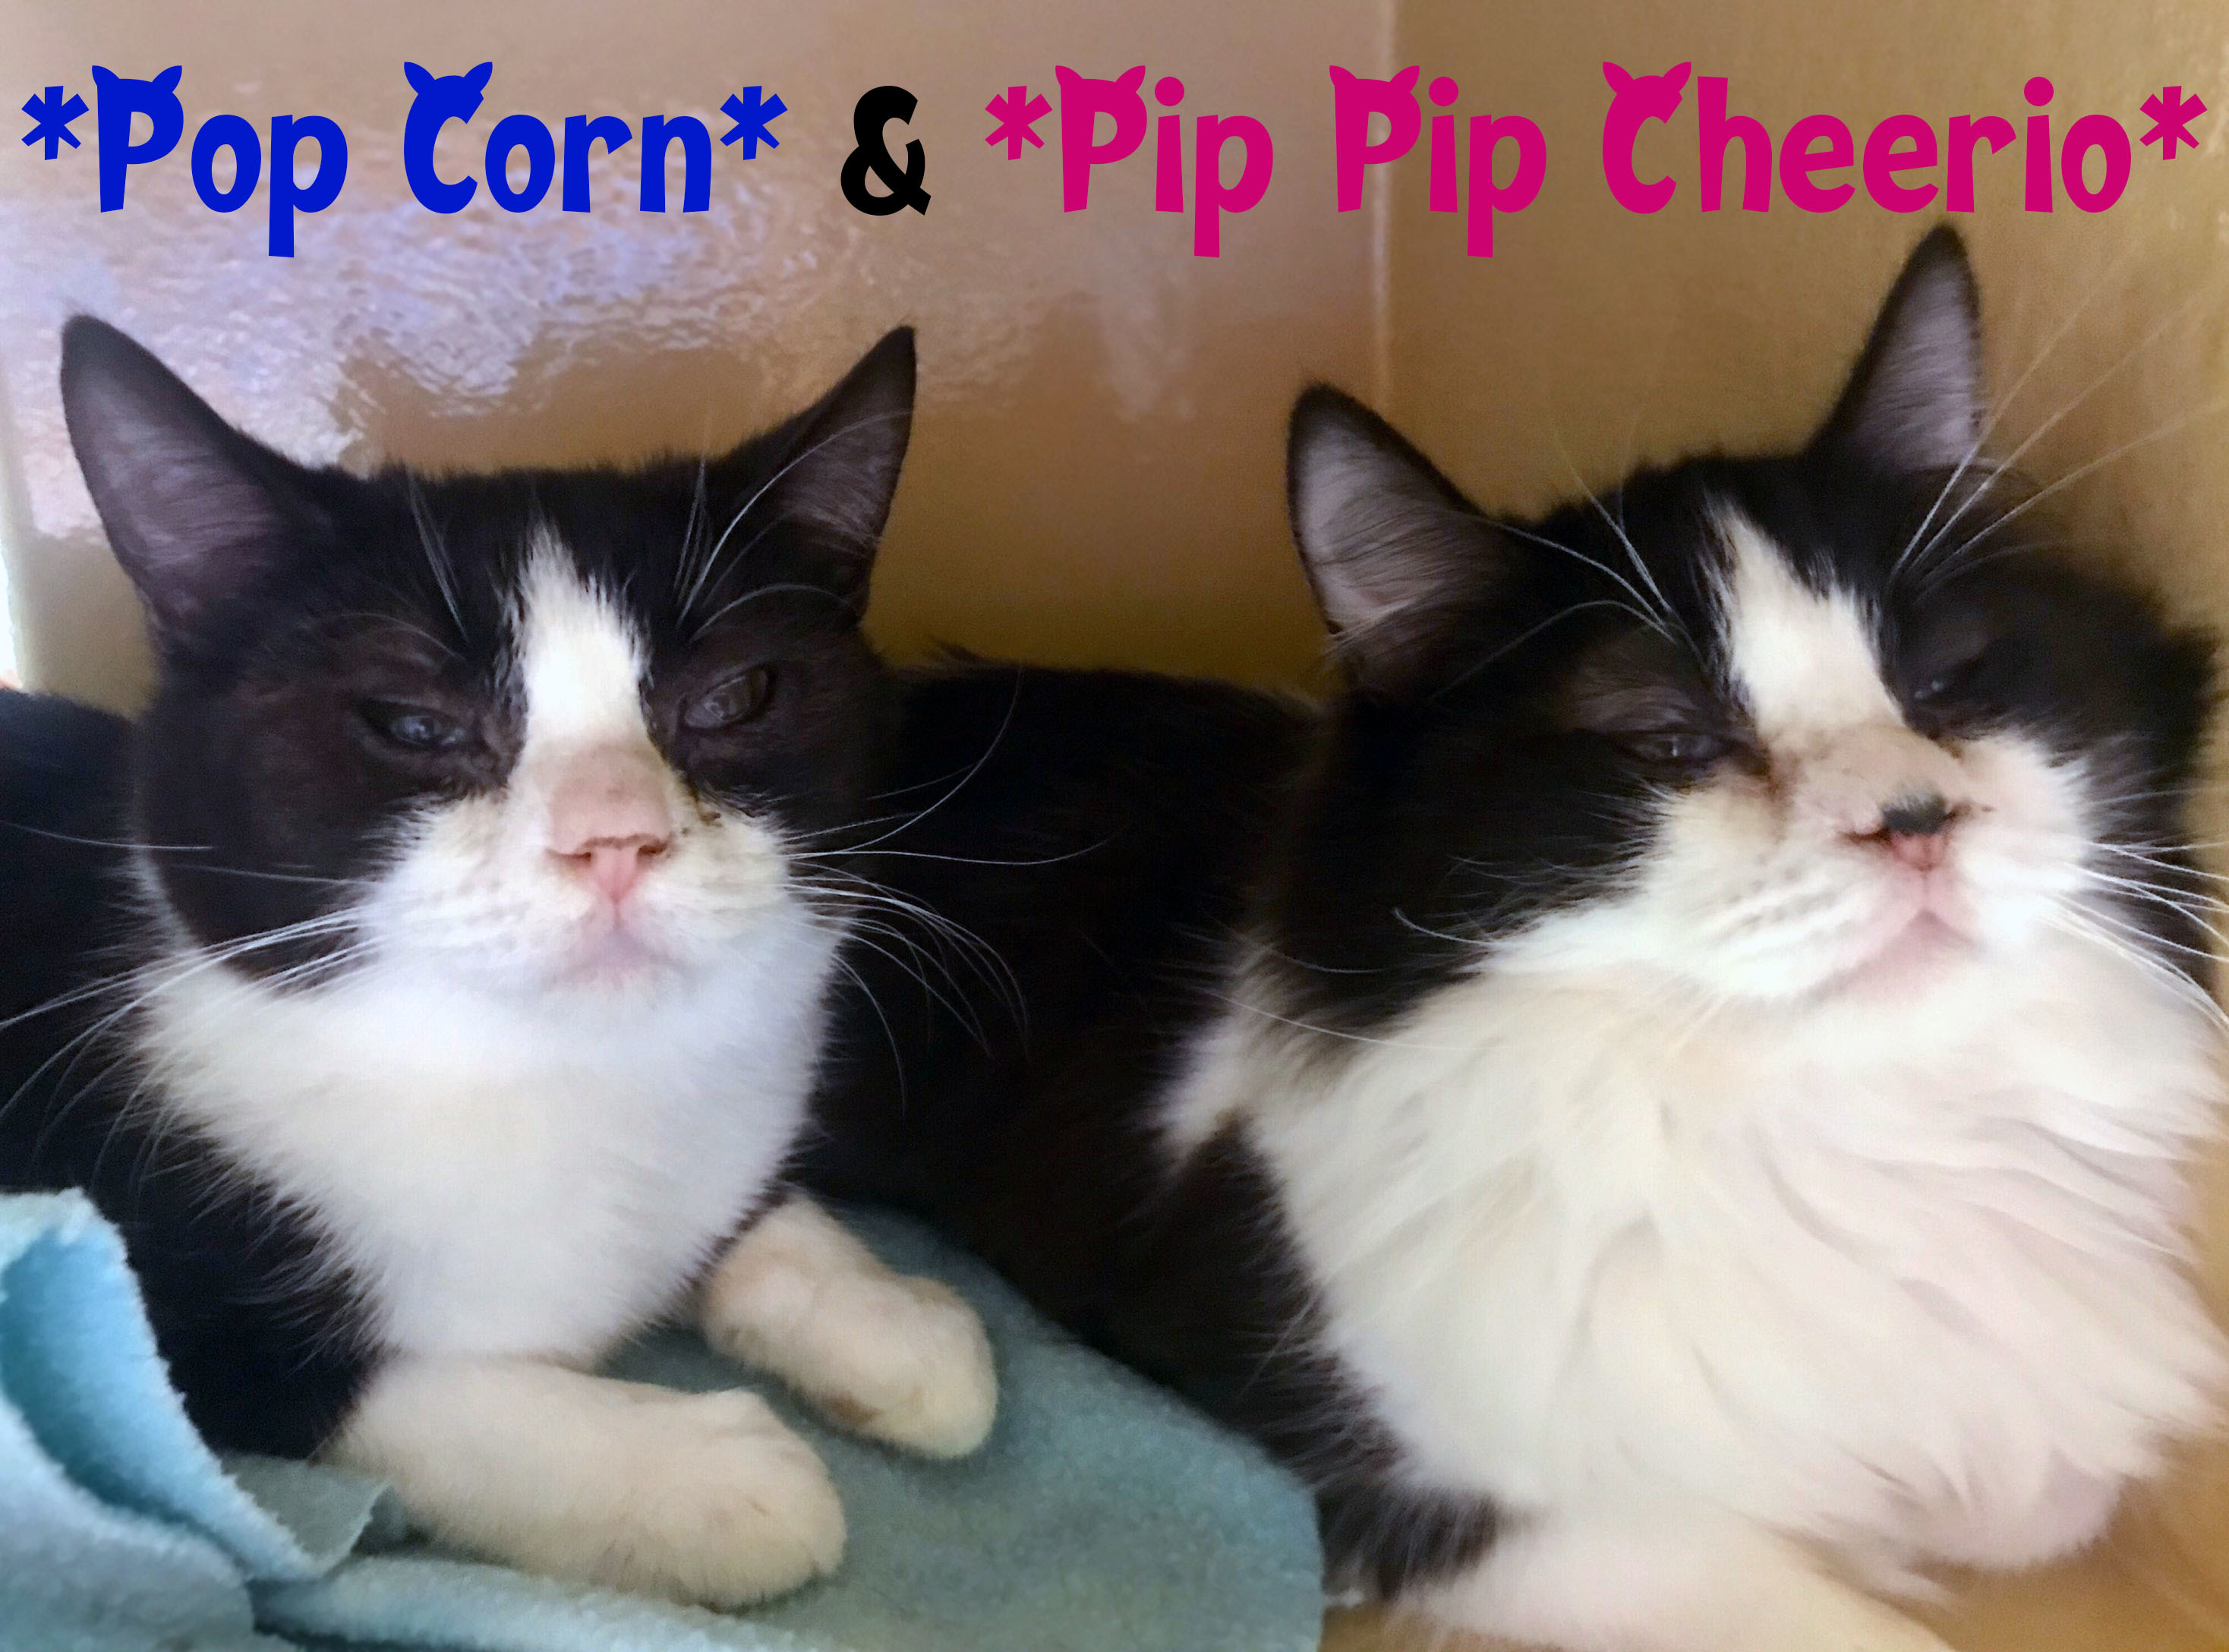 Pop Corn Bonded To Pip Pip Cheerio detail page